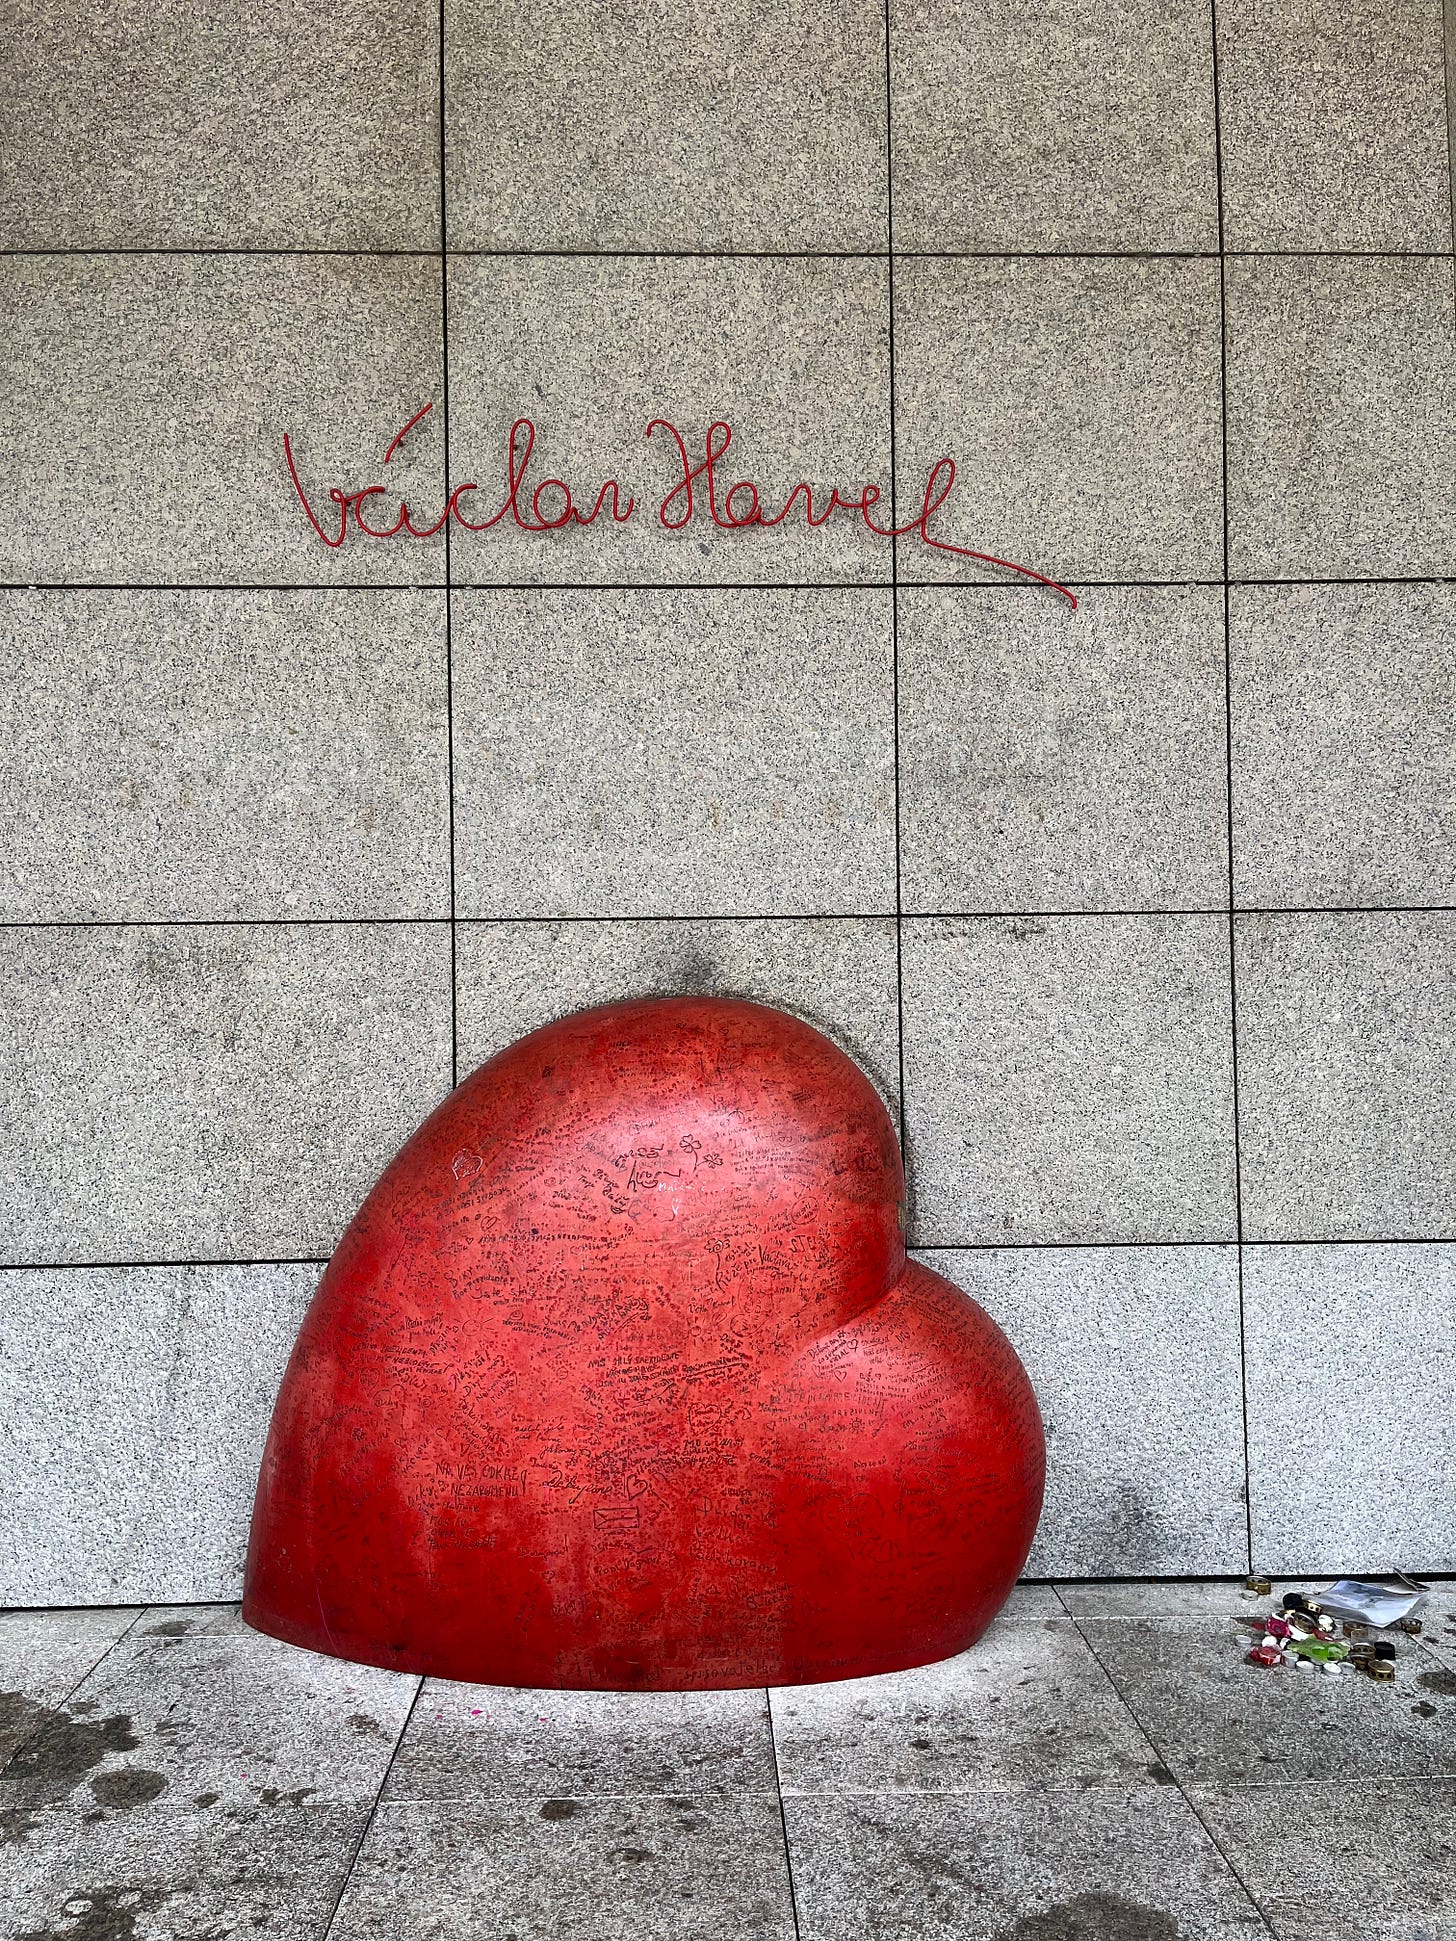 Heart shaped sculpture dedicated to Vaclav Havel